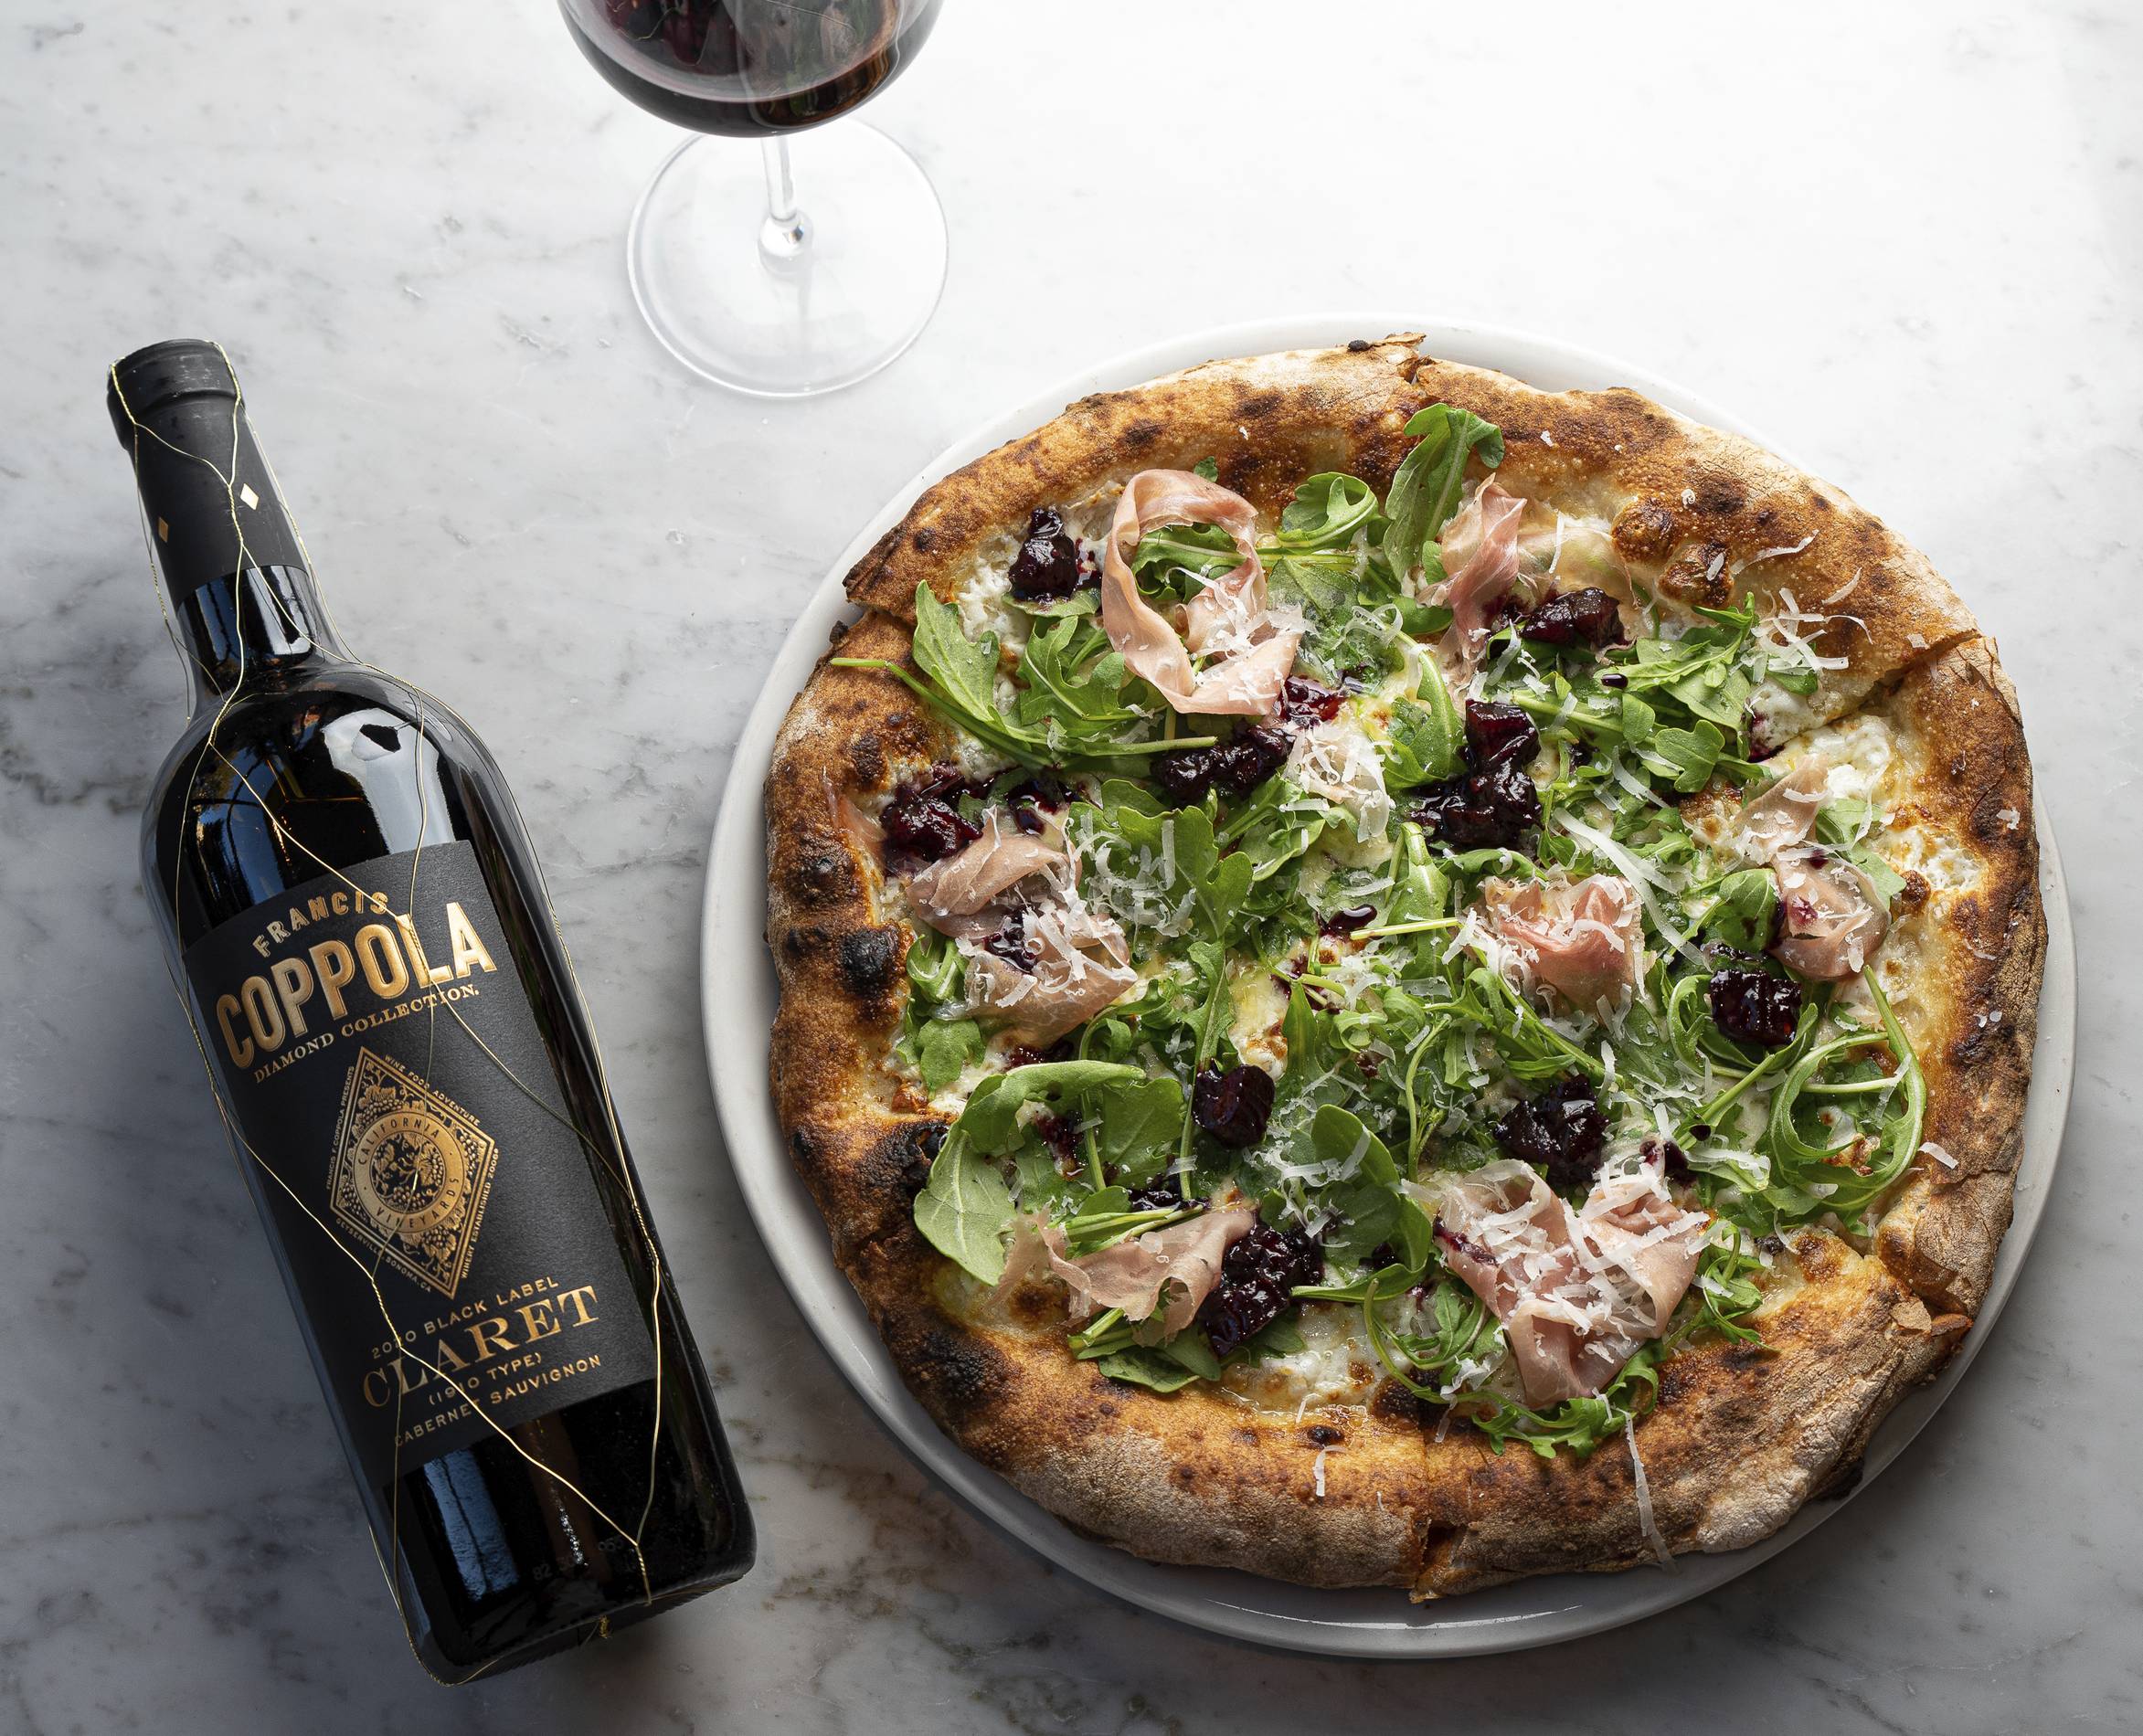 The Cal-Ital pizza by chef Dan Richer, paired with Francis Ford Coppola's Diamond Collection Claret red wine